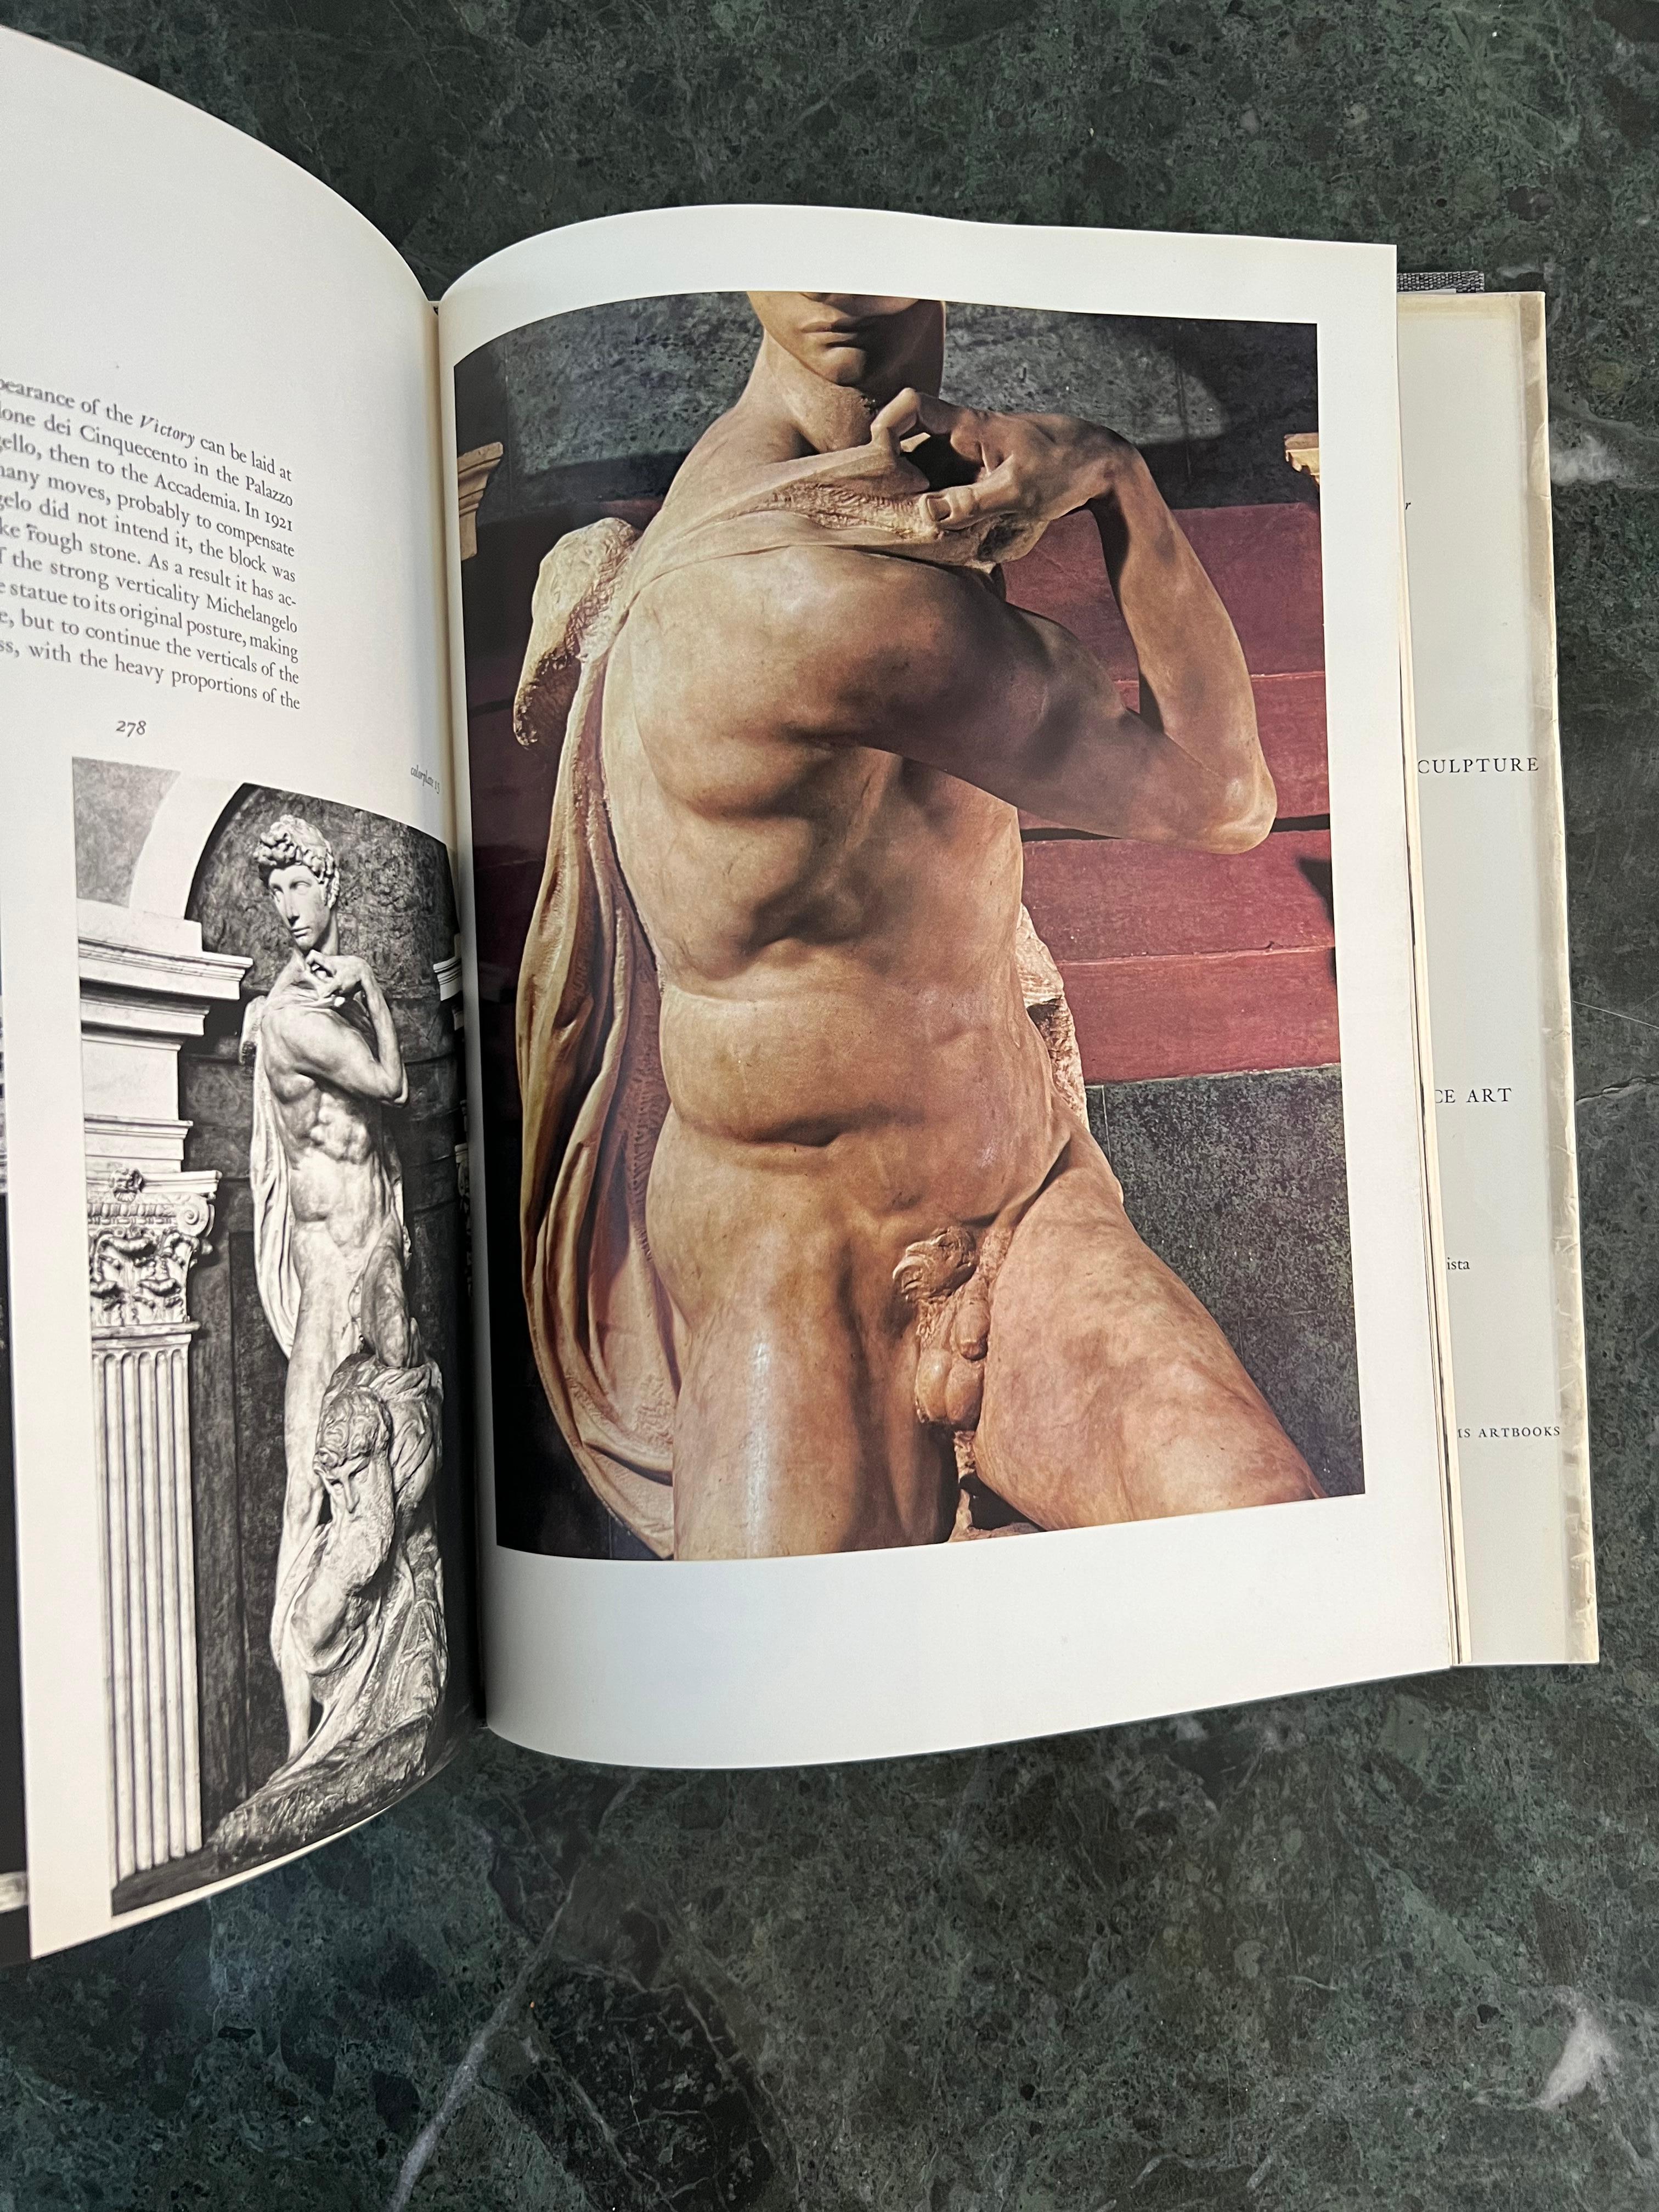 Large Collectible Art Book “Michelangelo: The Complete Sculpture”, 1982 For Sale 4